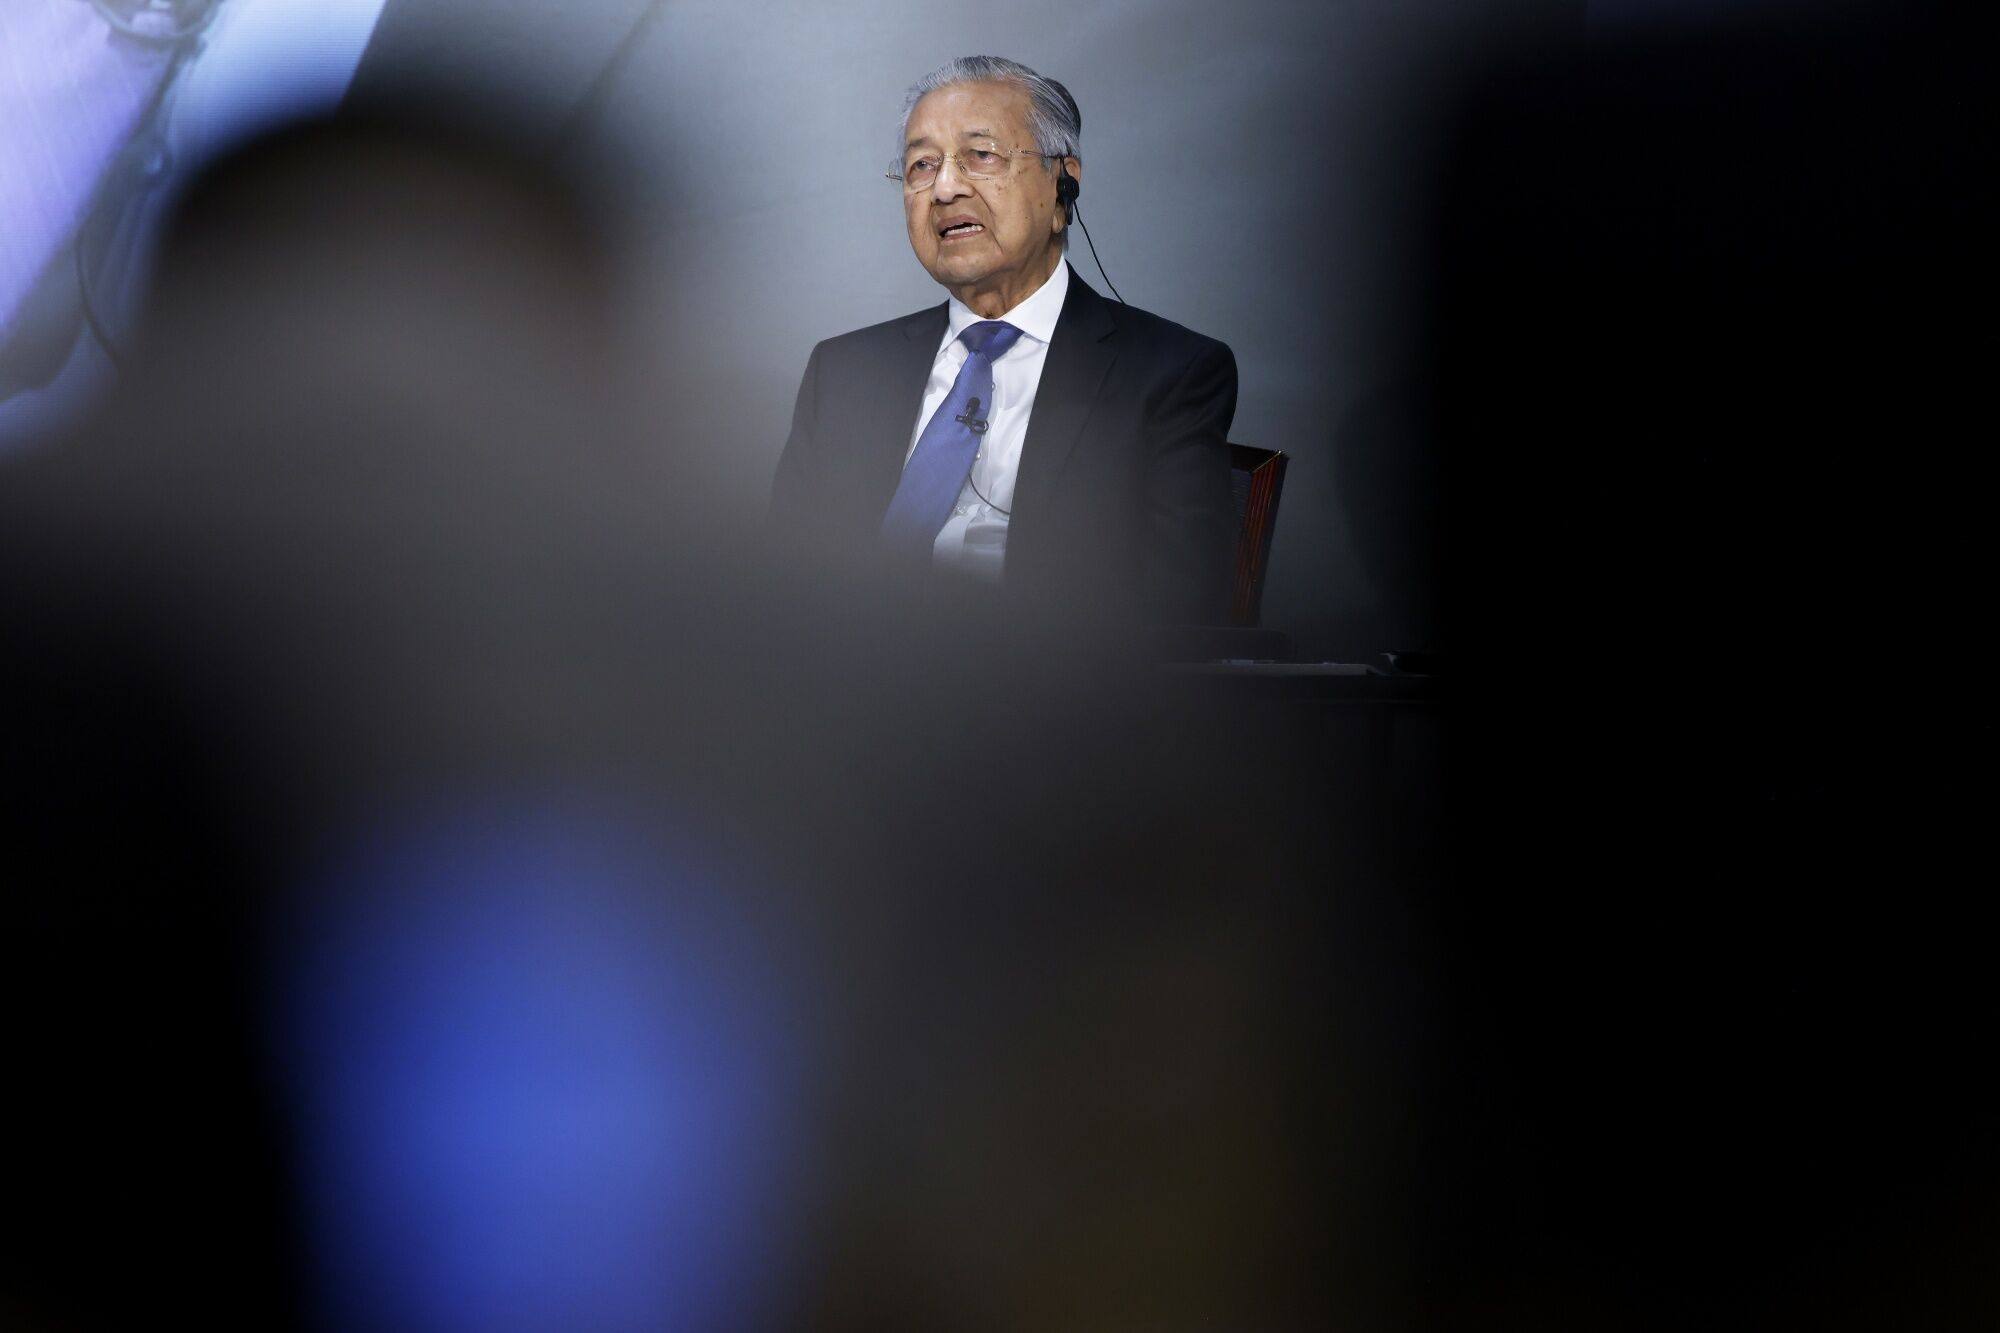 Mahathir Mohamad, Malaysia’s former prime minister, speaks during the Nikkei Forum Future of Asia in Tokyo on May 26, 2023. Mahathir’s premiership between 1981 and 2003 institutionalised his thinking about Malays’ upliftment . Photo: Bloomberg